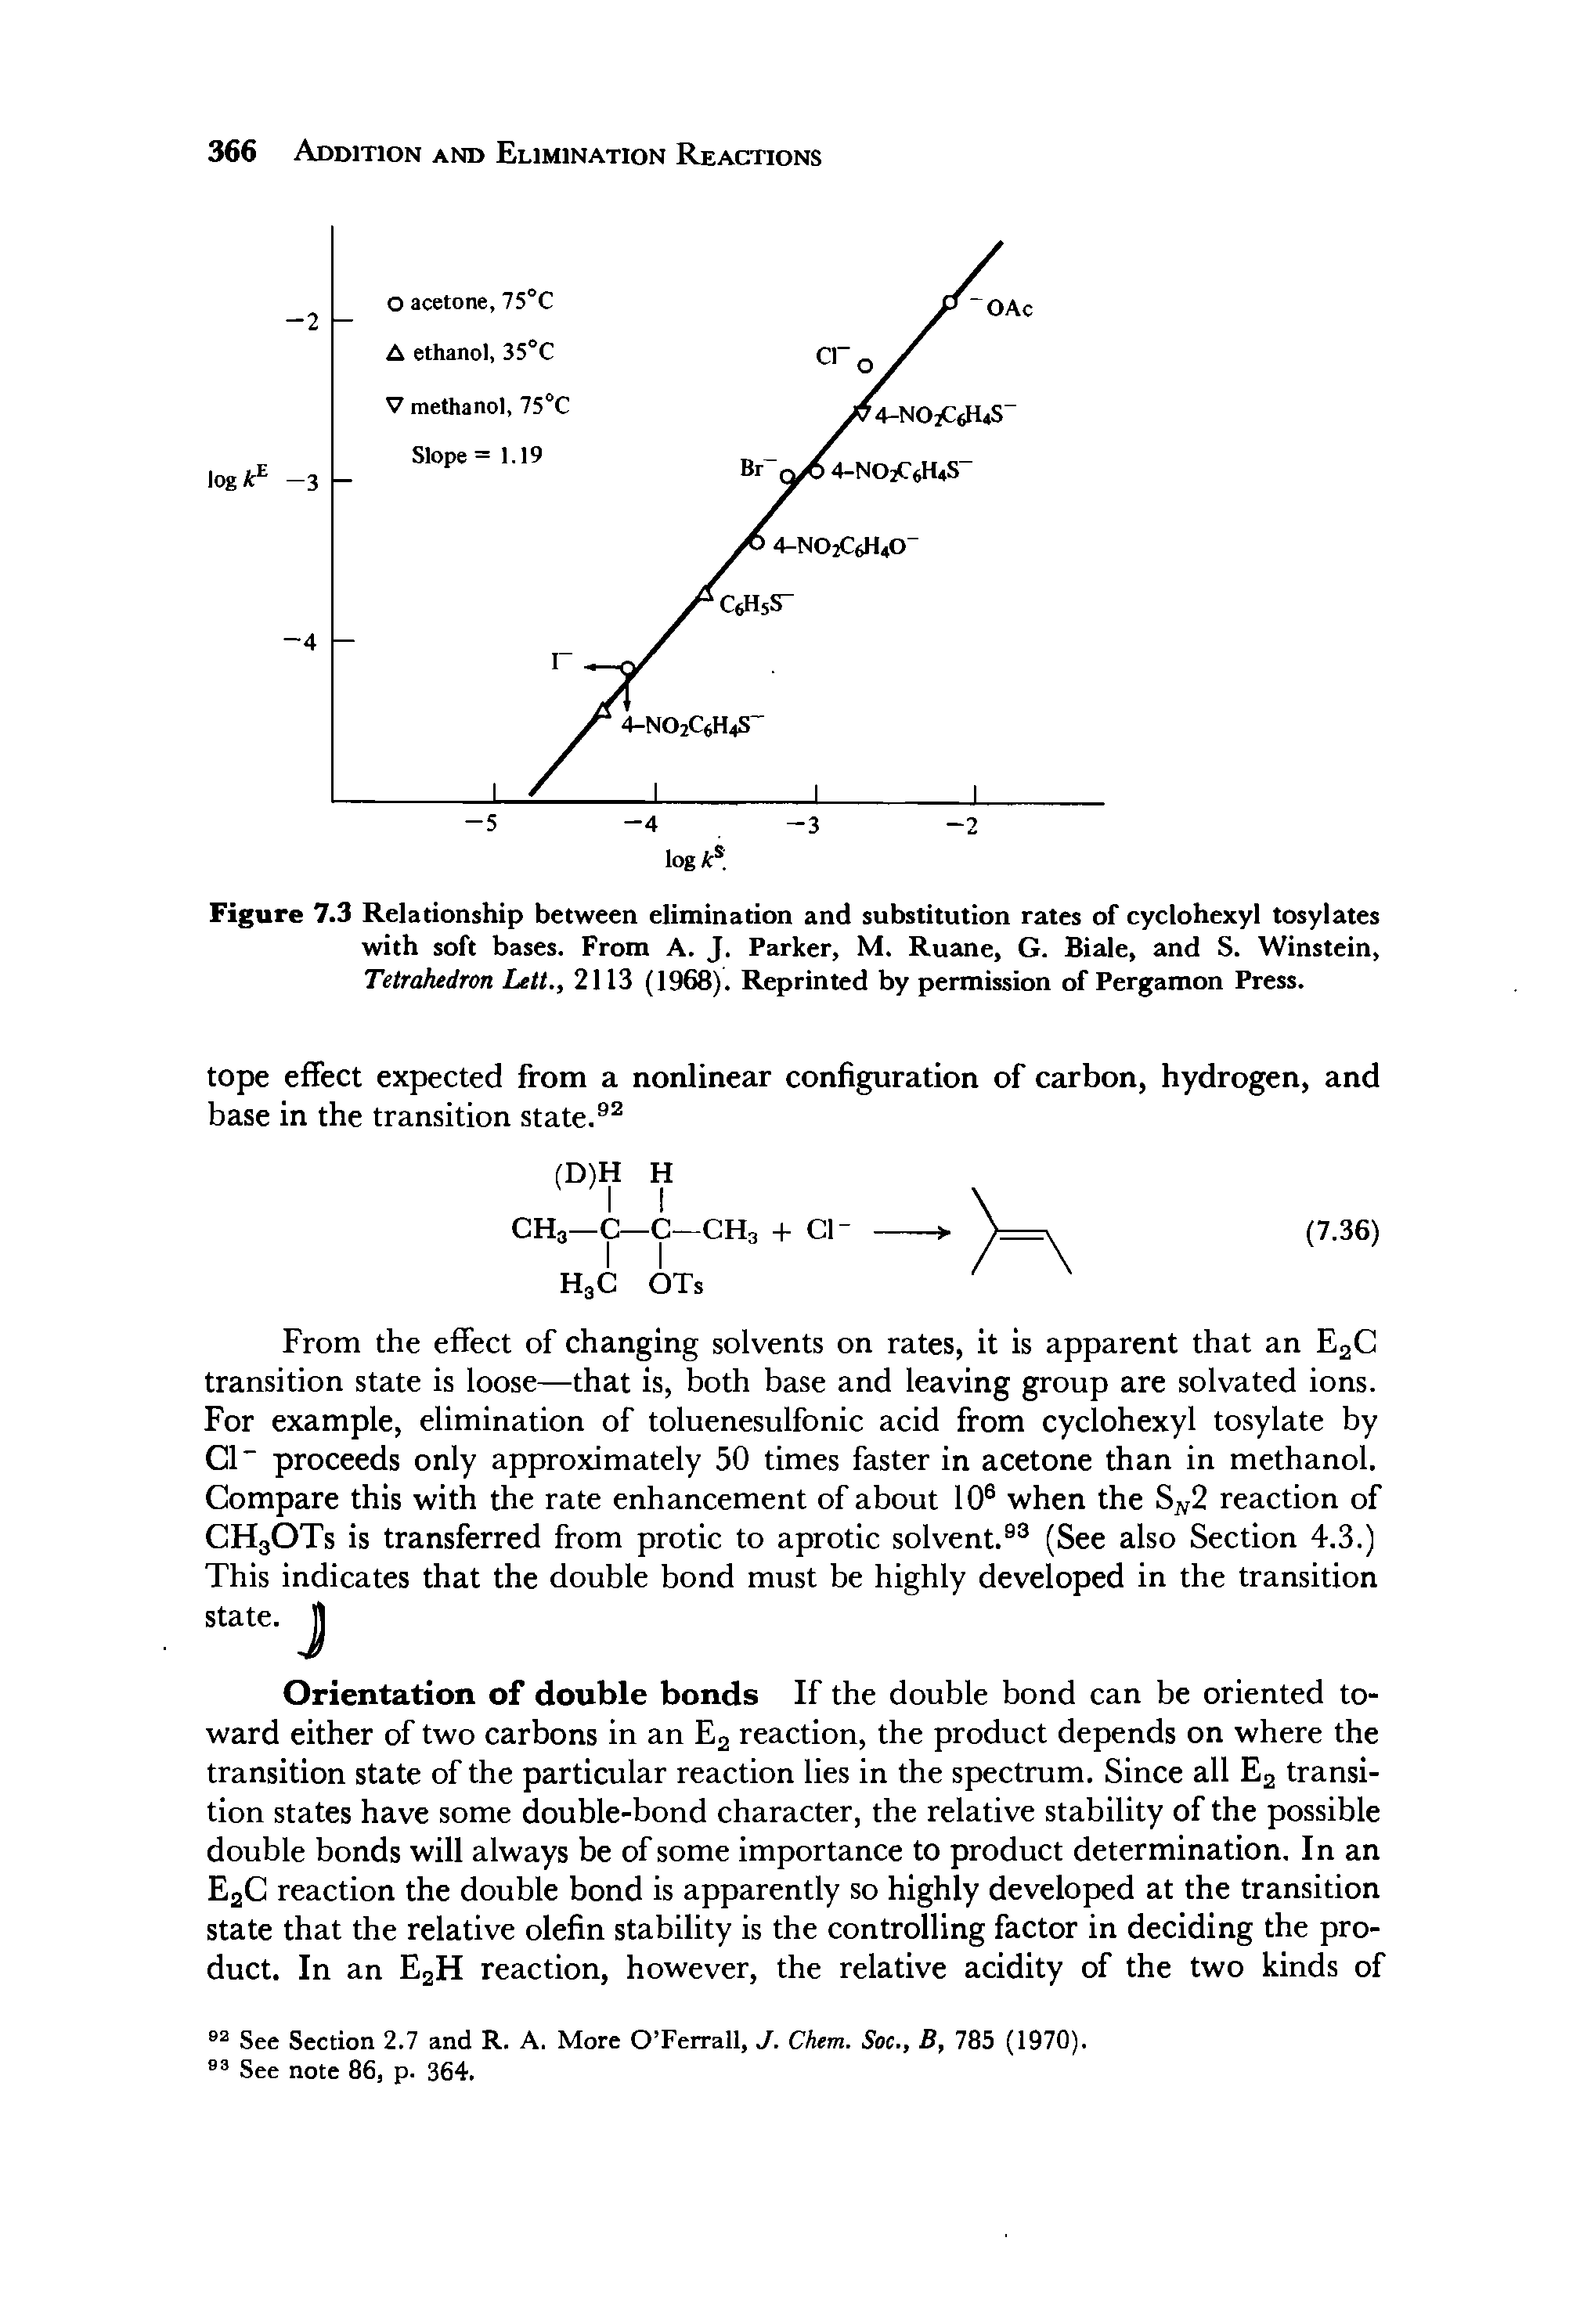 Figure 7.3 Relationship between elimination and substitution rates of cyclohexyl tosylates with soft bases. From A. J. Parker, M. Ruane, G. Biale, and S. Winstein, Tetrahedron Lett., 2113 (1968). Reprinted by permission of Pergamon Press.